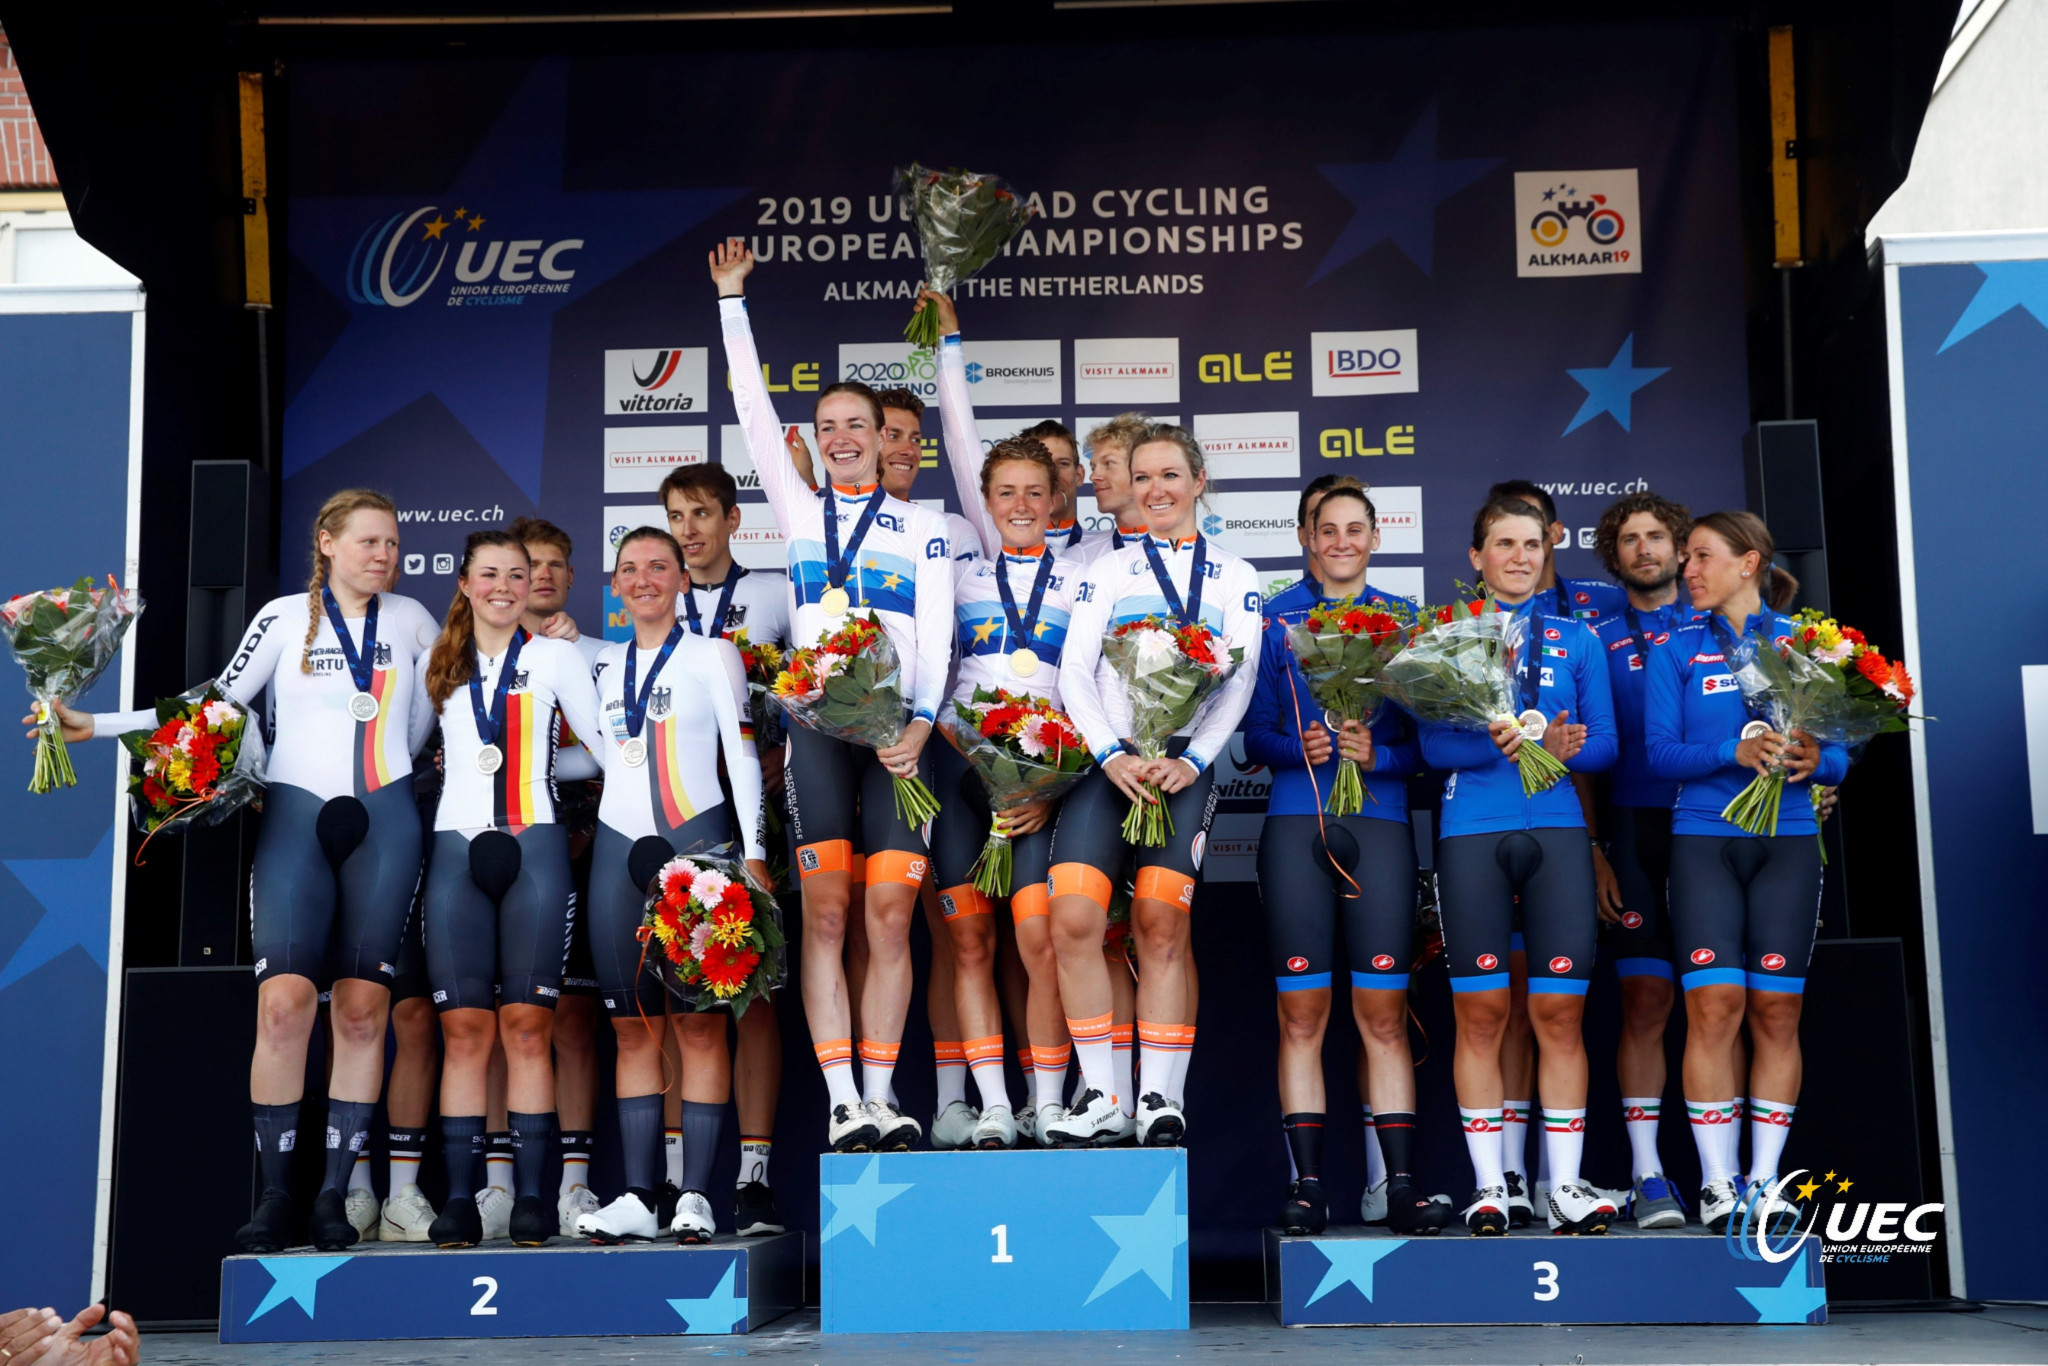 Hosts Netherlands win first mixed relay team time trial at European Road Cycling Championships